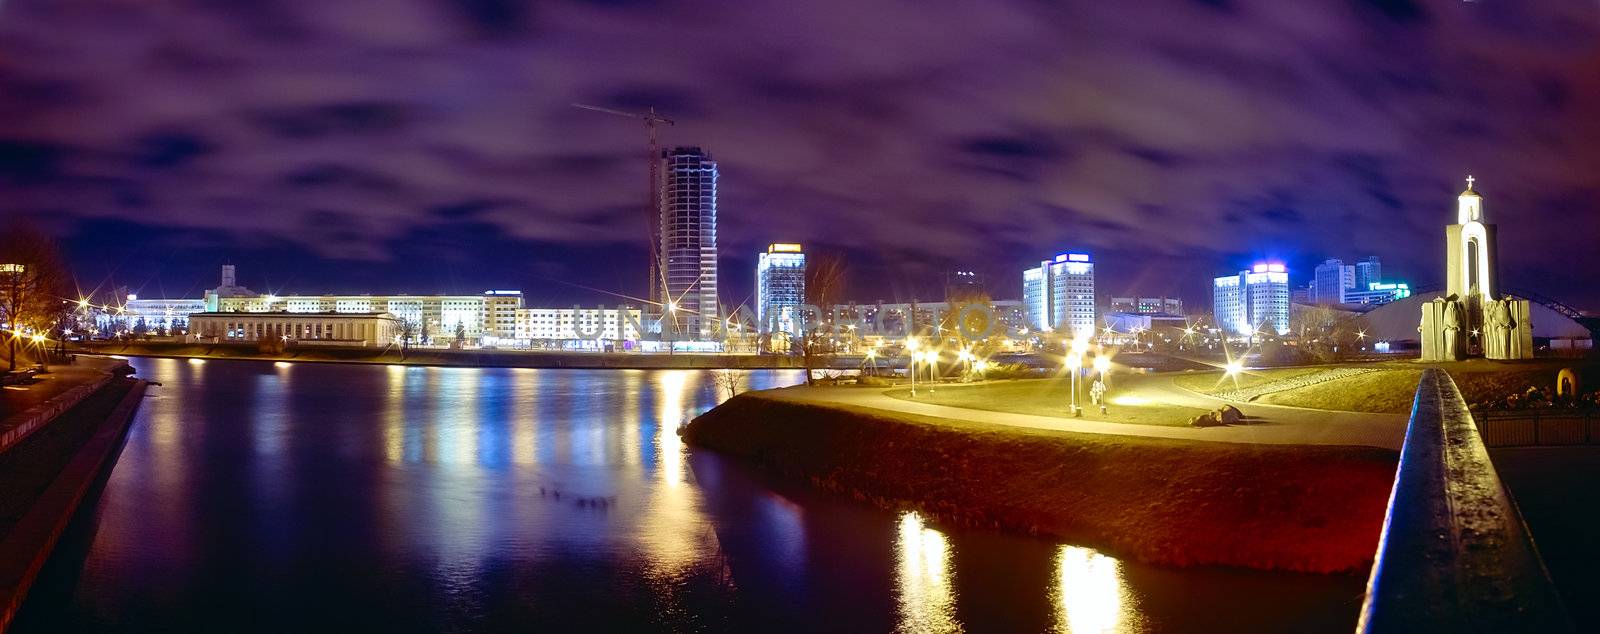 panorama of Minsk at night by Alekcey